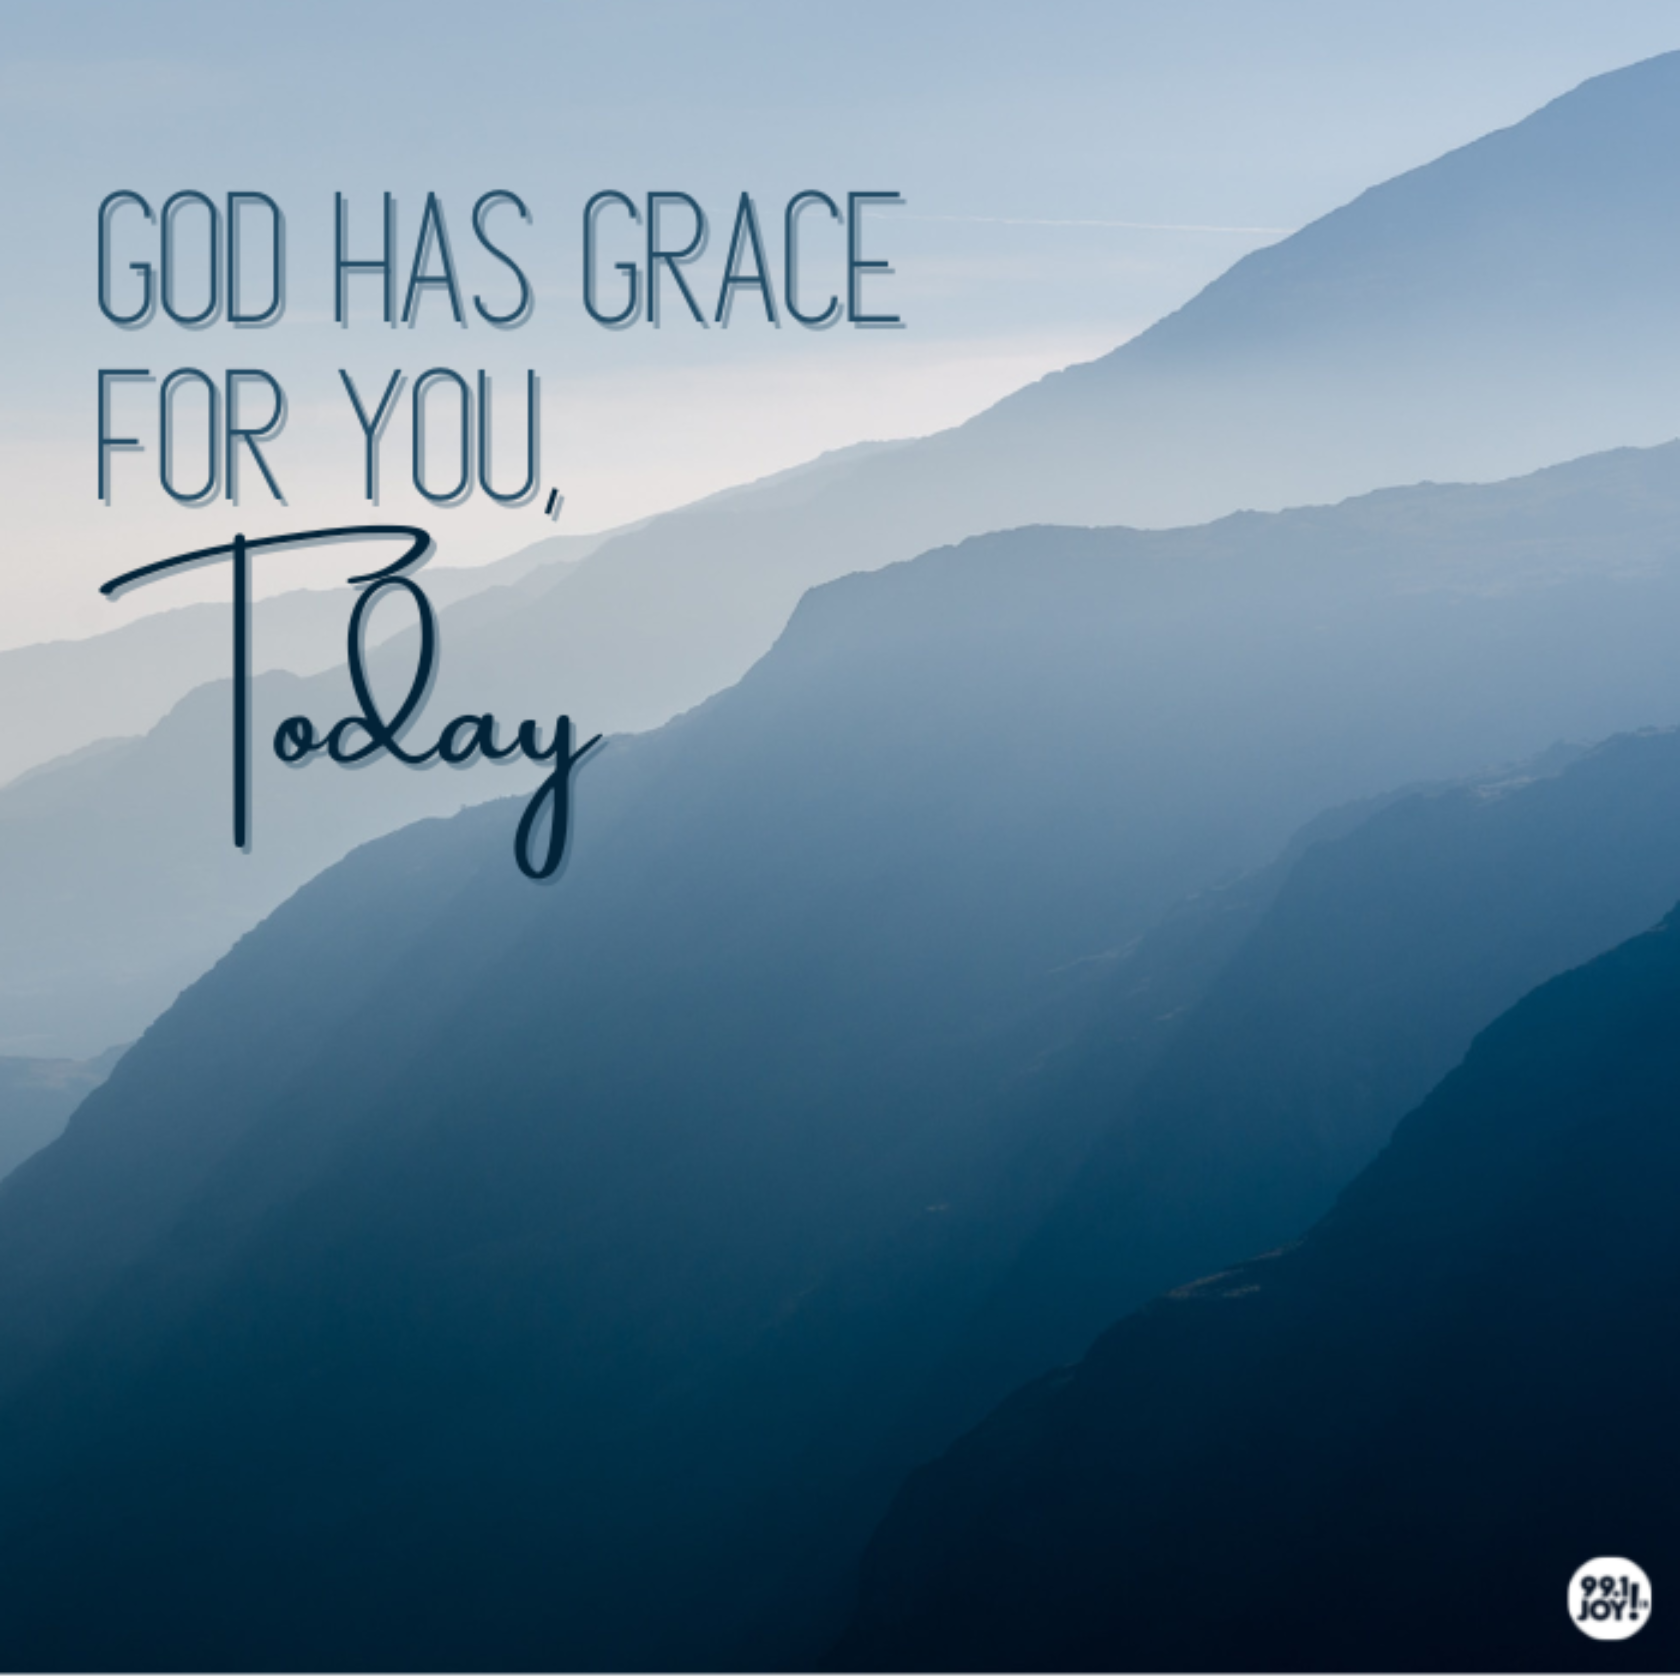 God Has Grace For You, Today